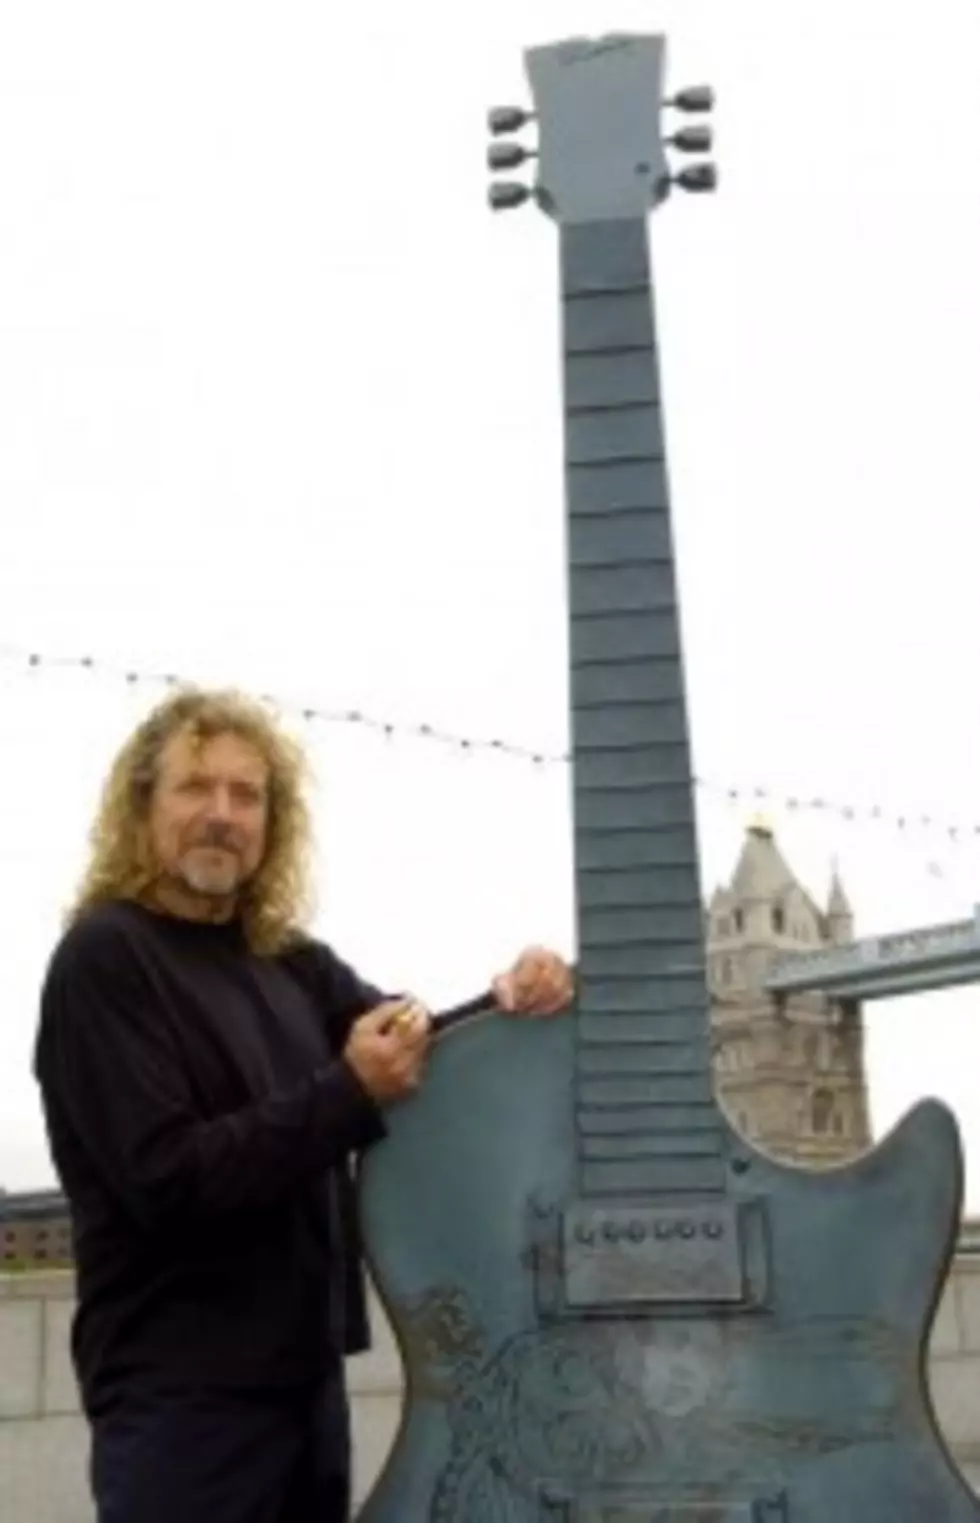 Robert Plant To Receive Spirit Award At Montreal Jazz Festival This Friday [VIDEO]